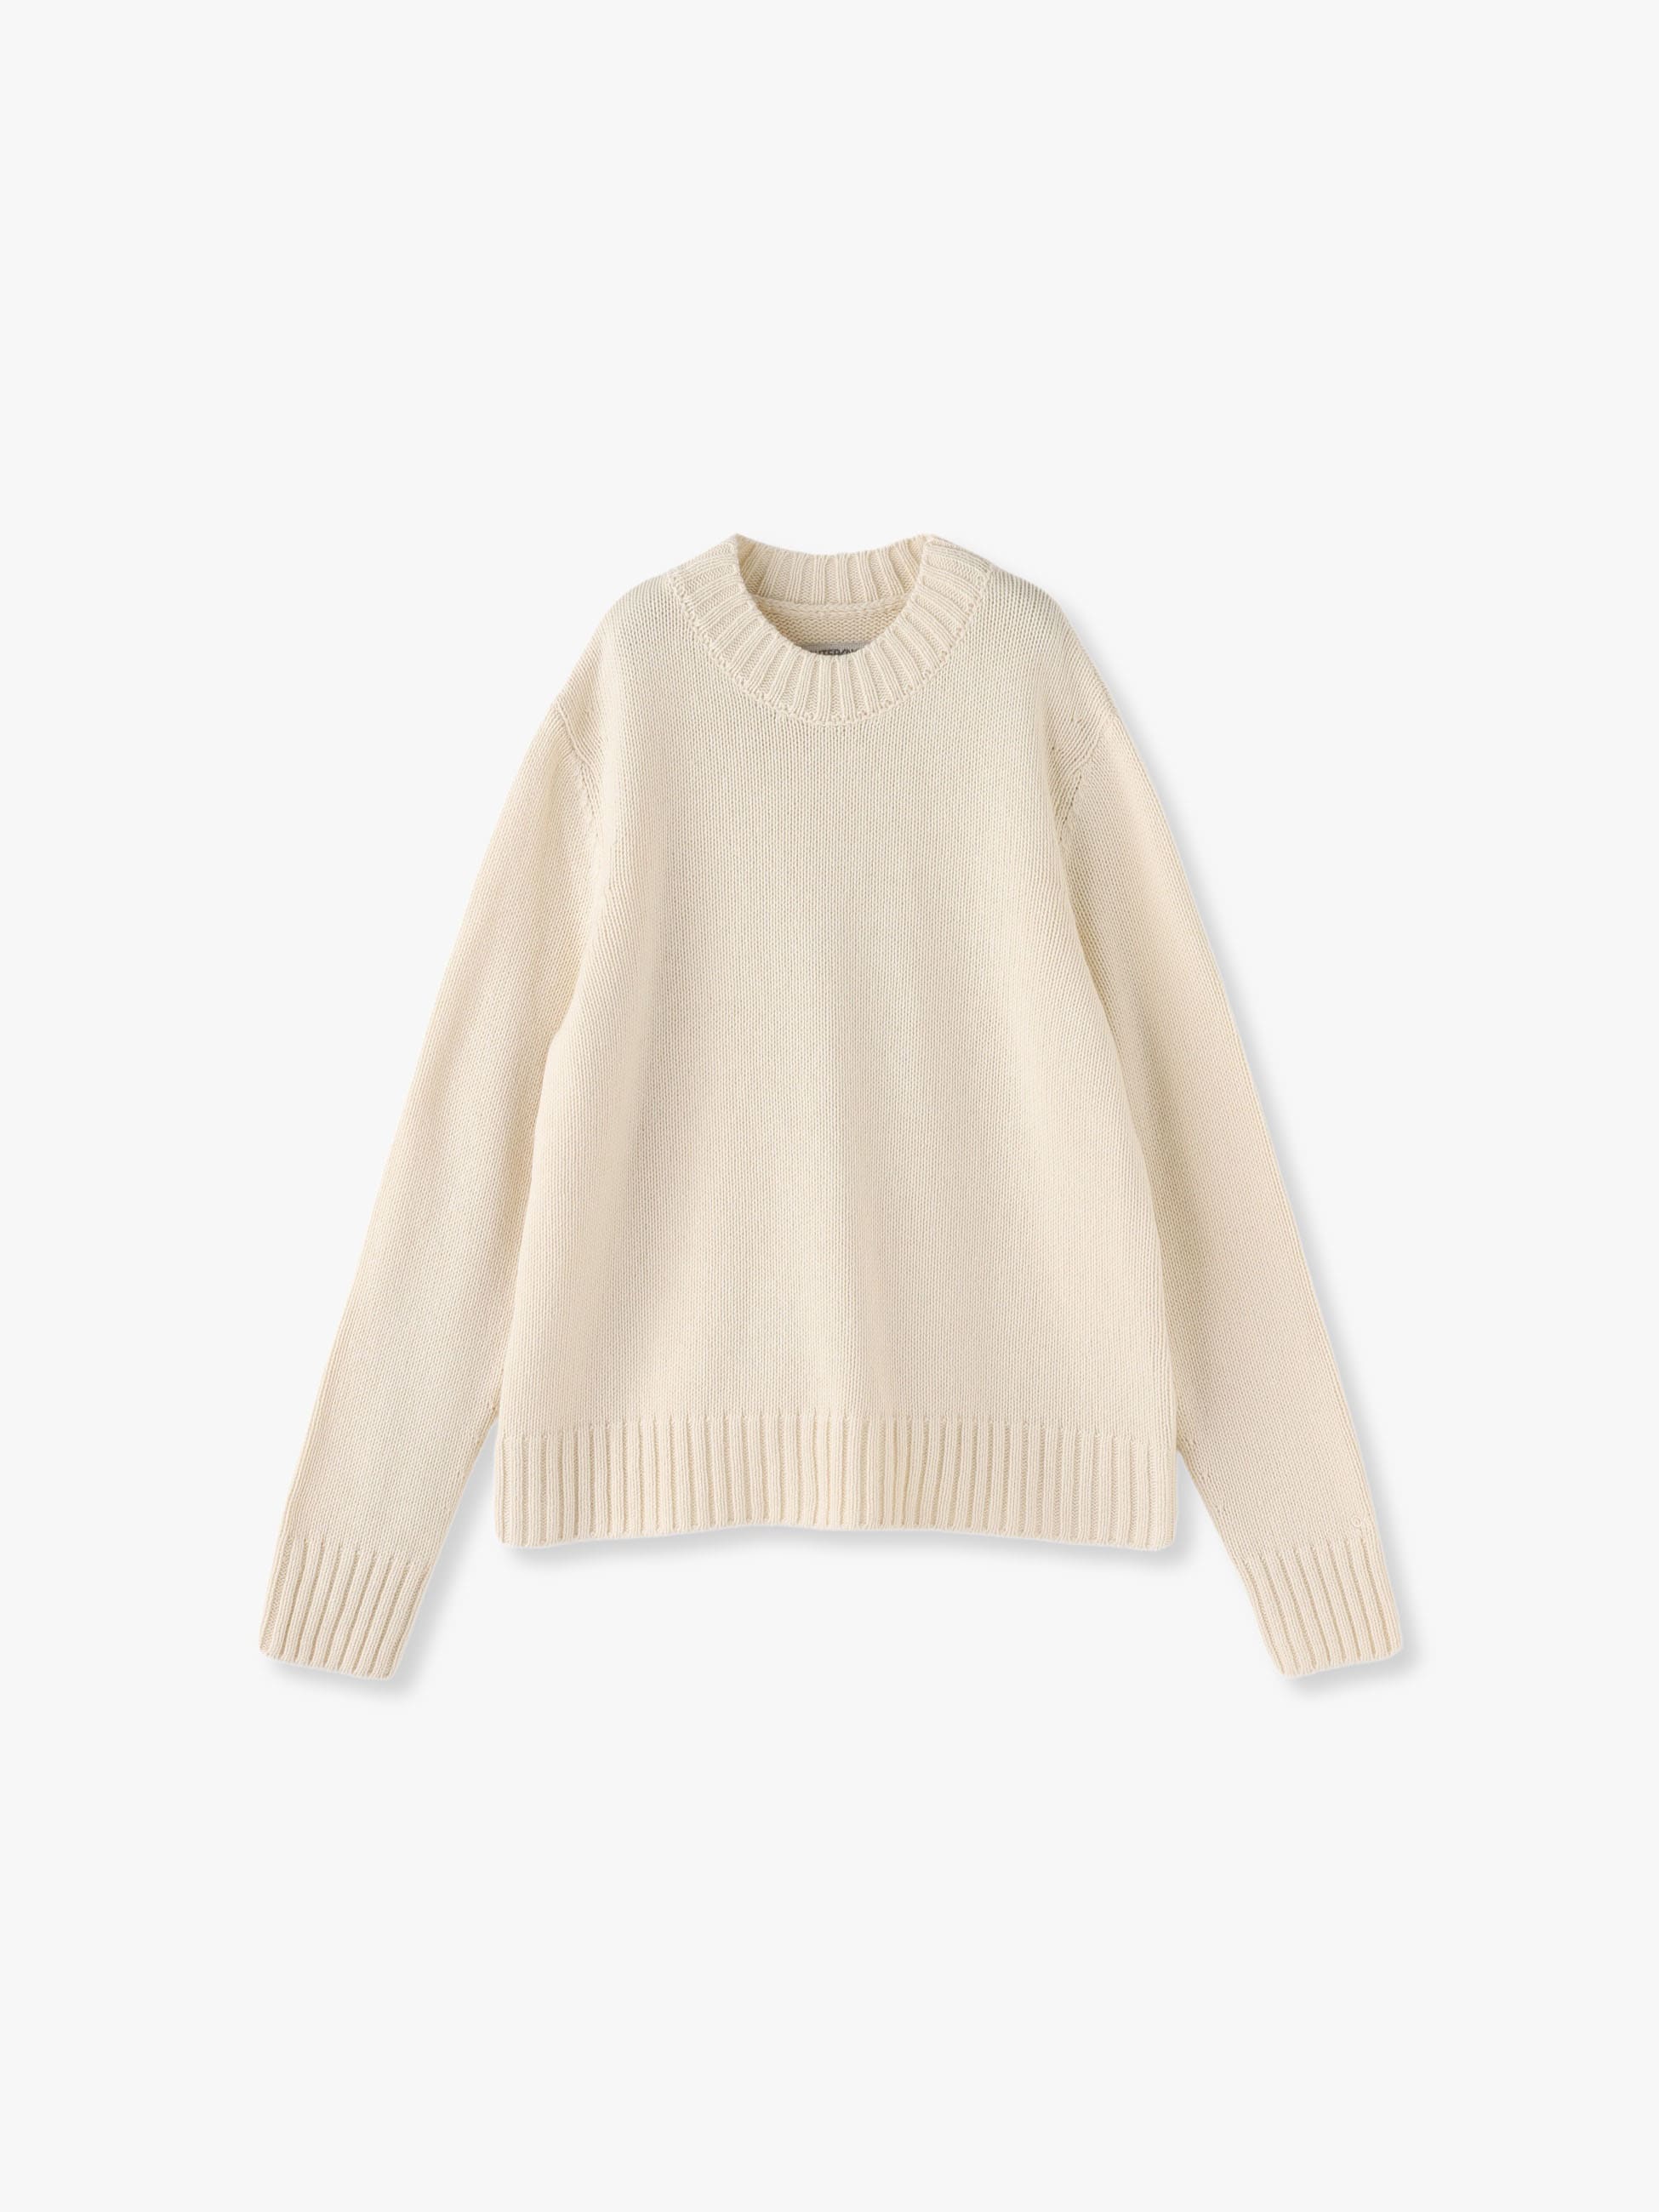 Roma Knit Pullover 詳細画像 ivory 1